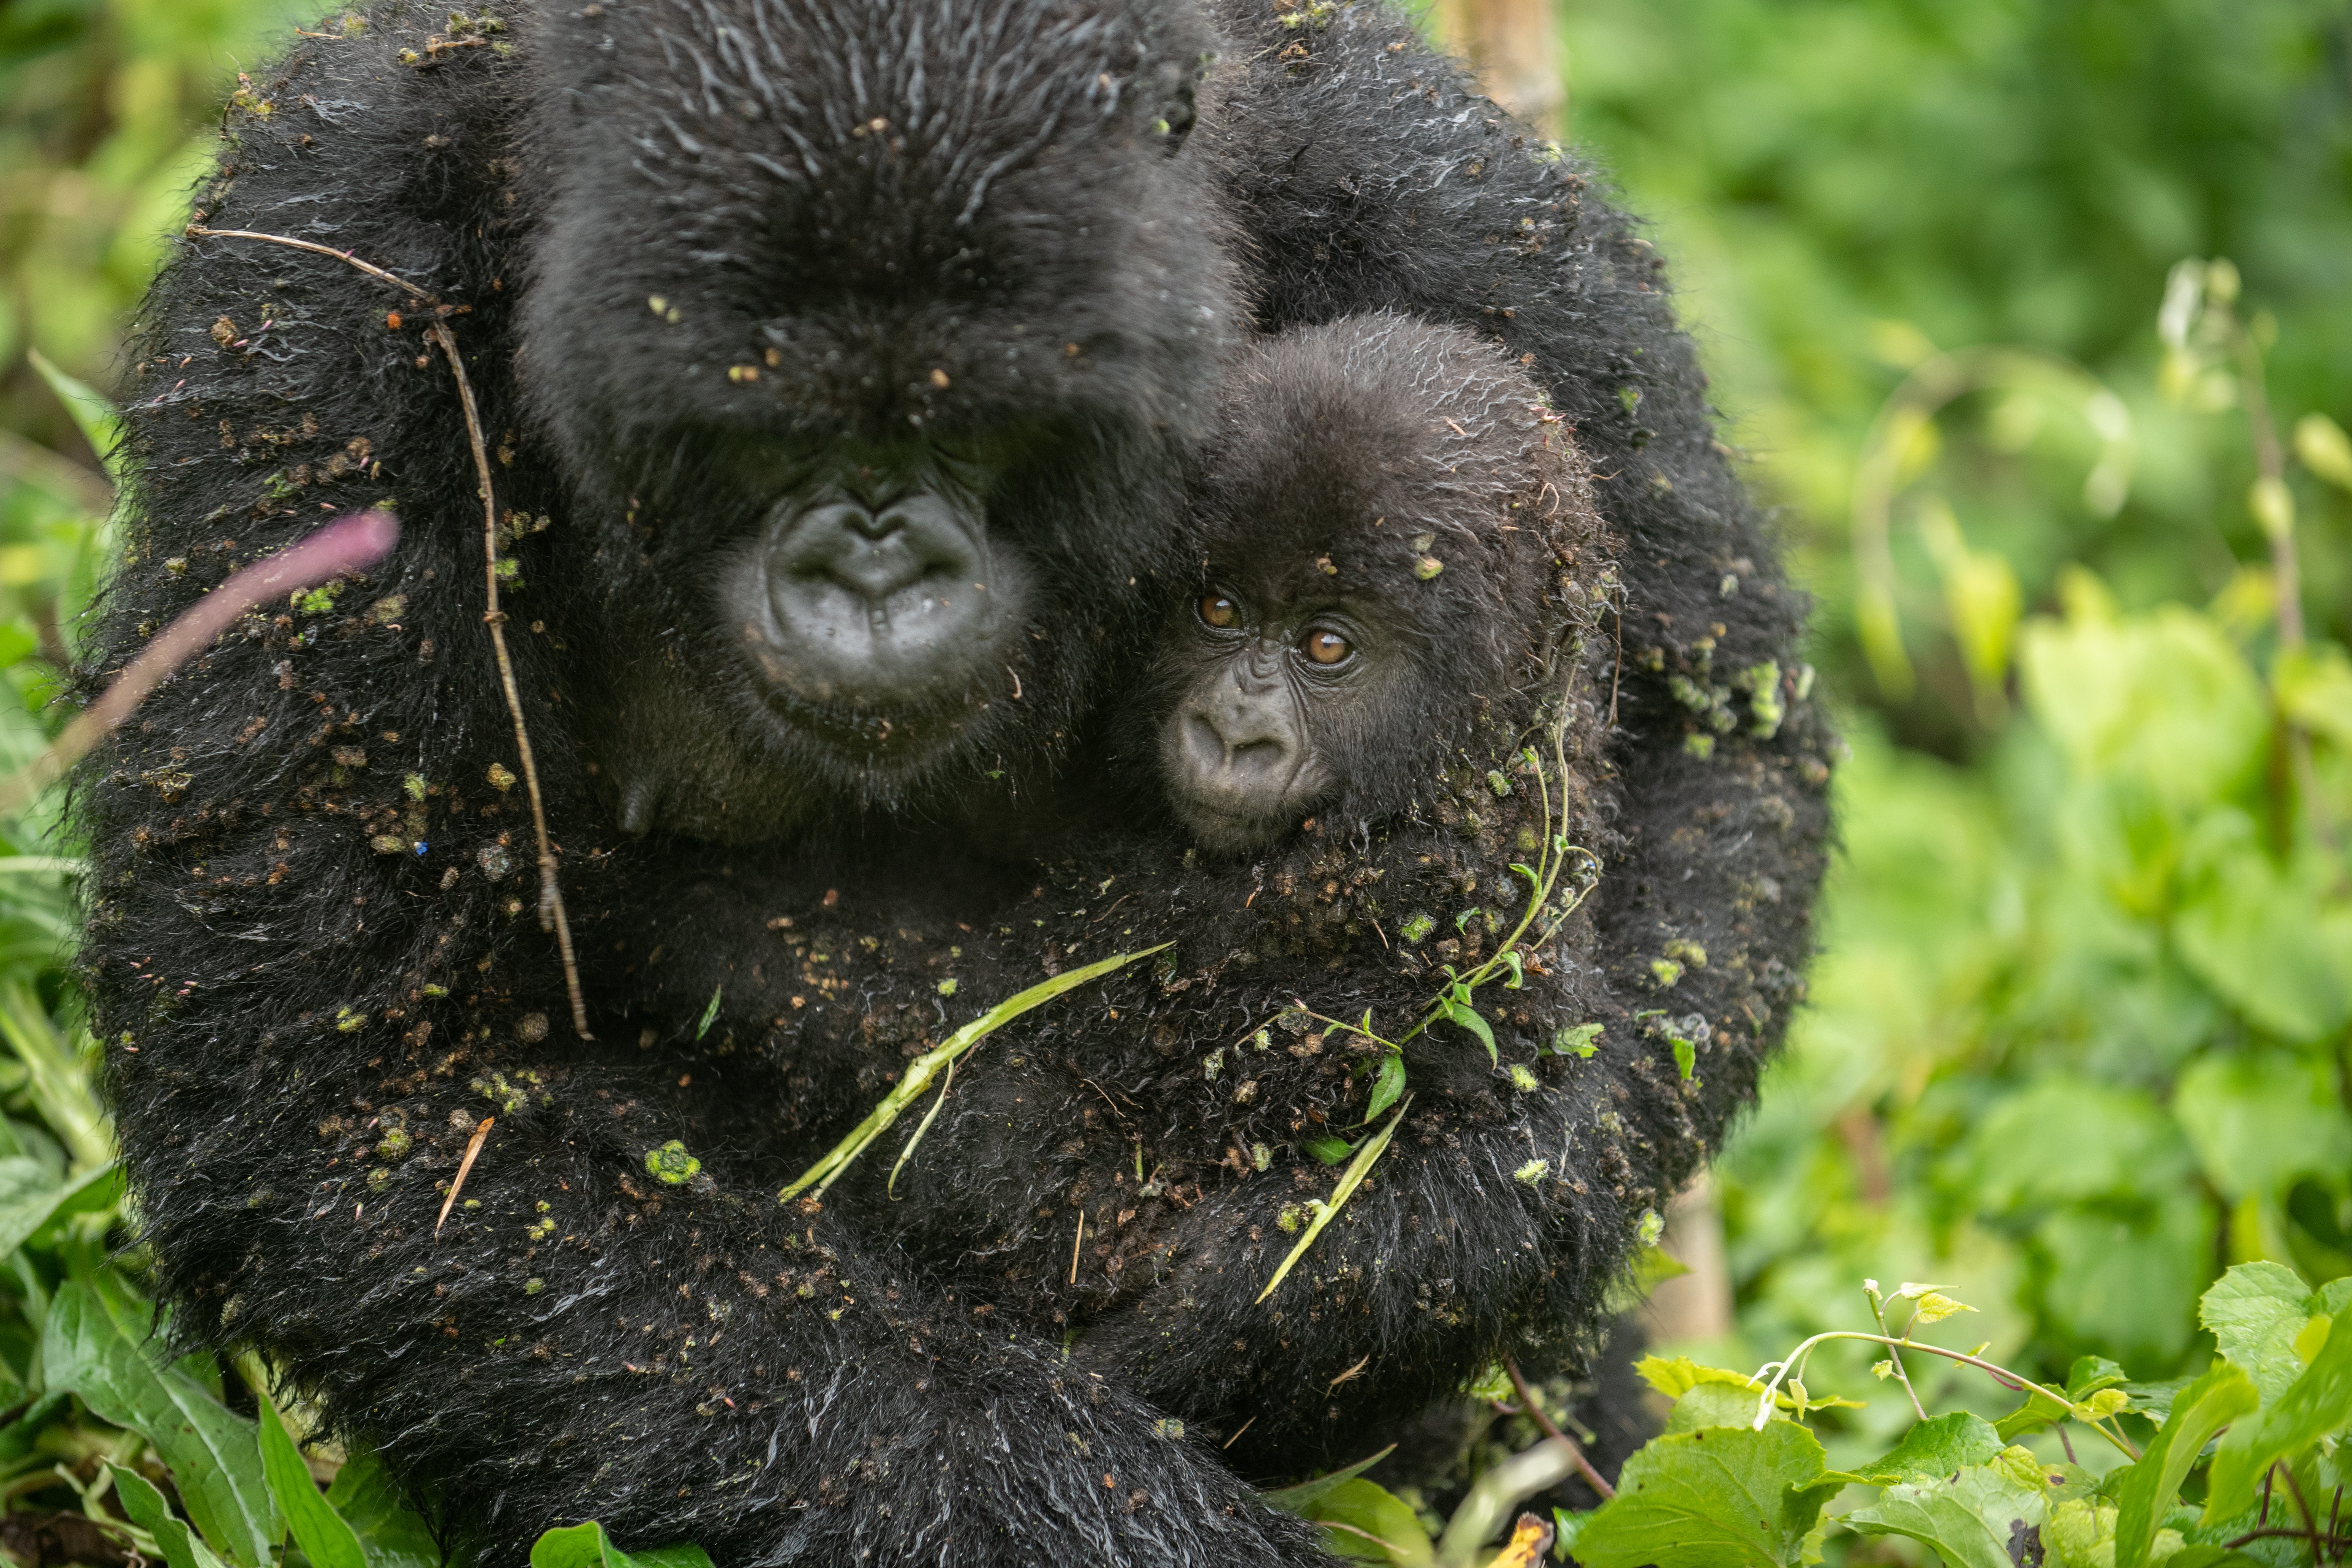 A mountain gorilla infant with its mother in Rwanda